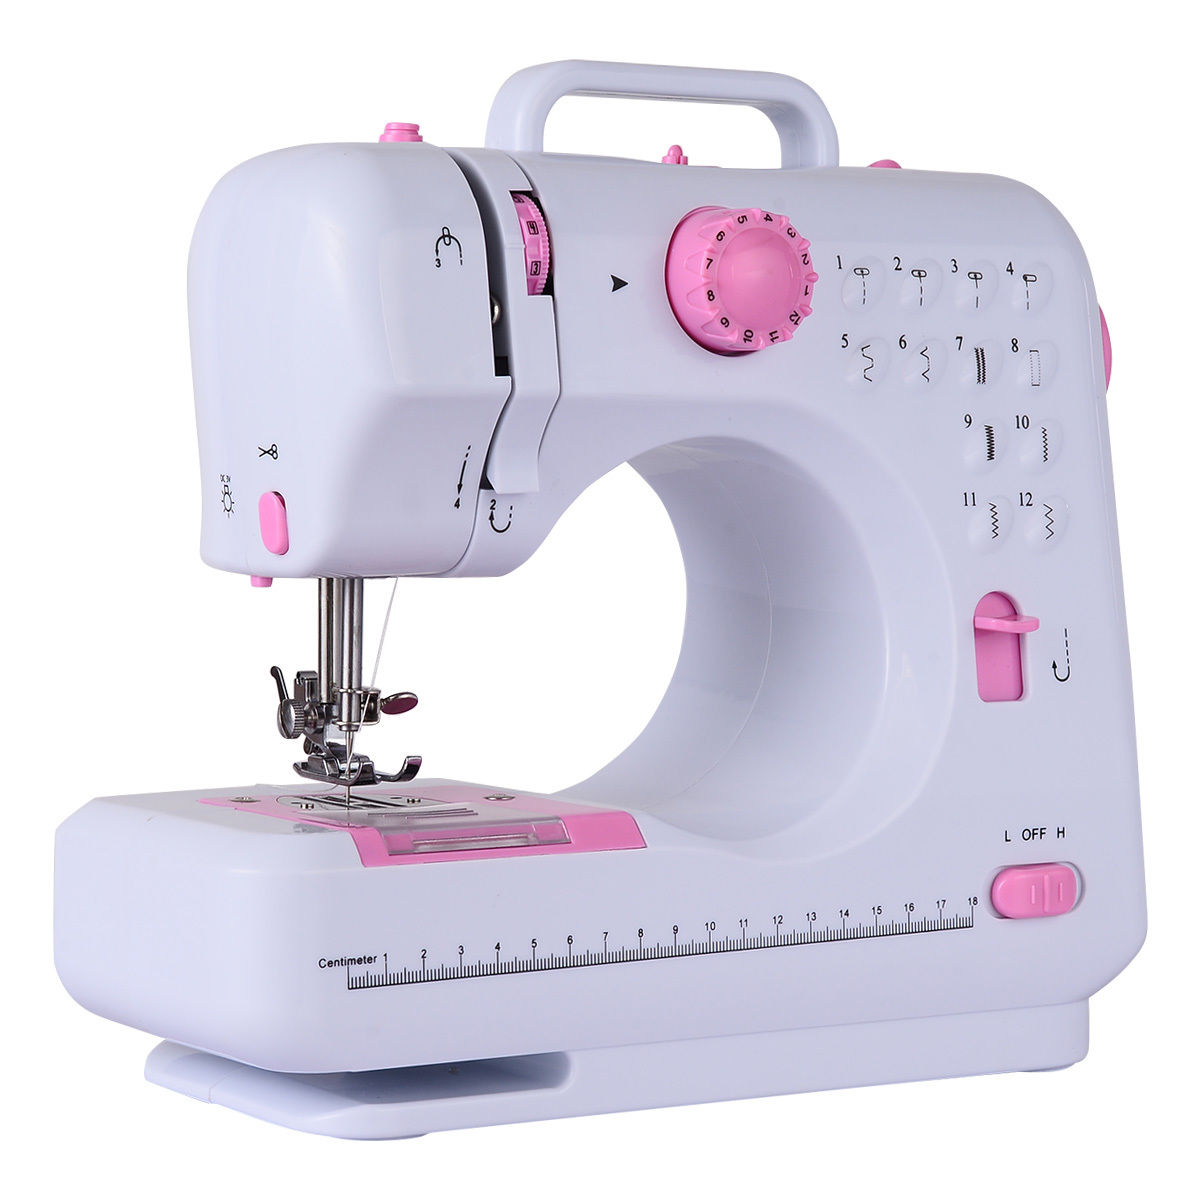 Costway Sewing Machine Free-Arm Crafting Mending Machine with 12 Built-In Stitched White - image 2 of 10